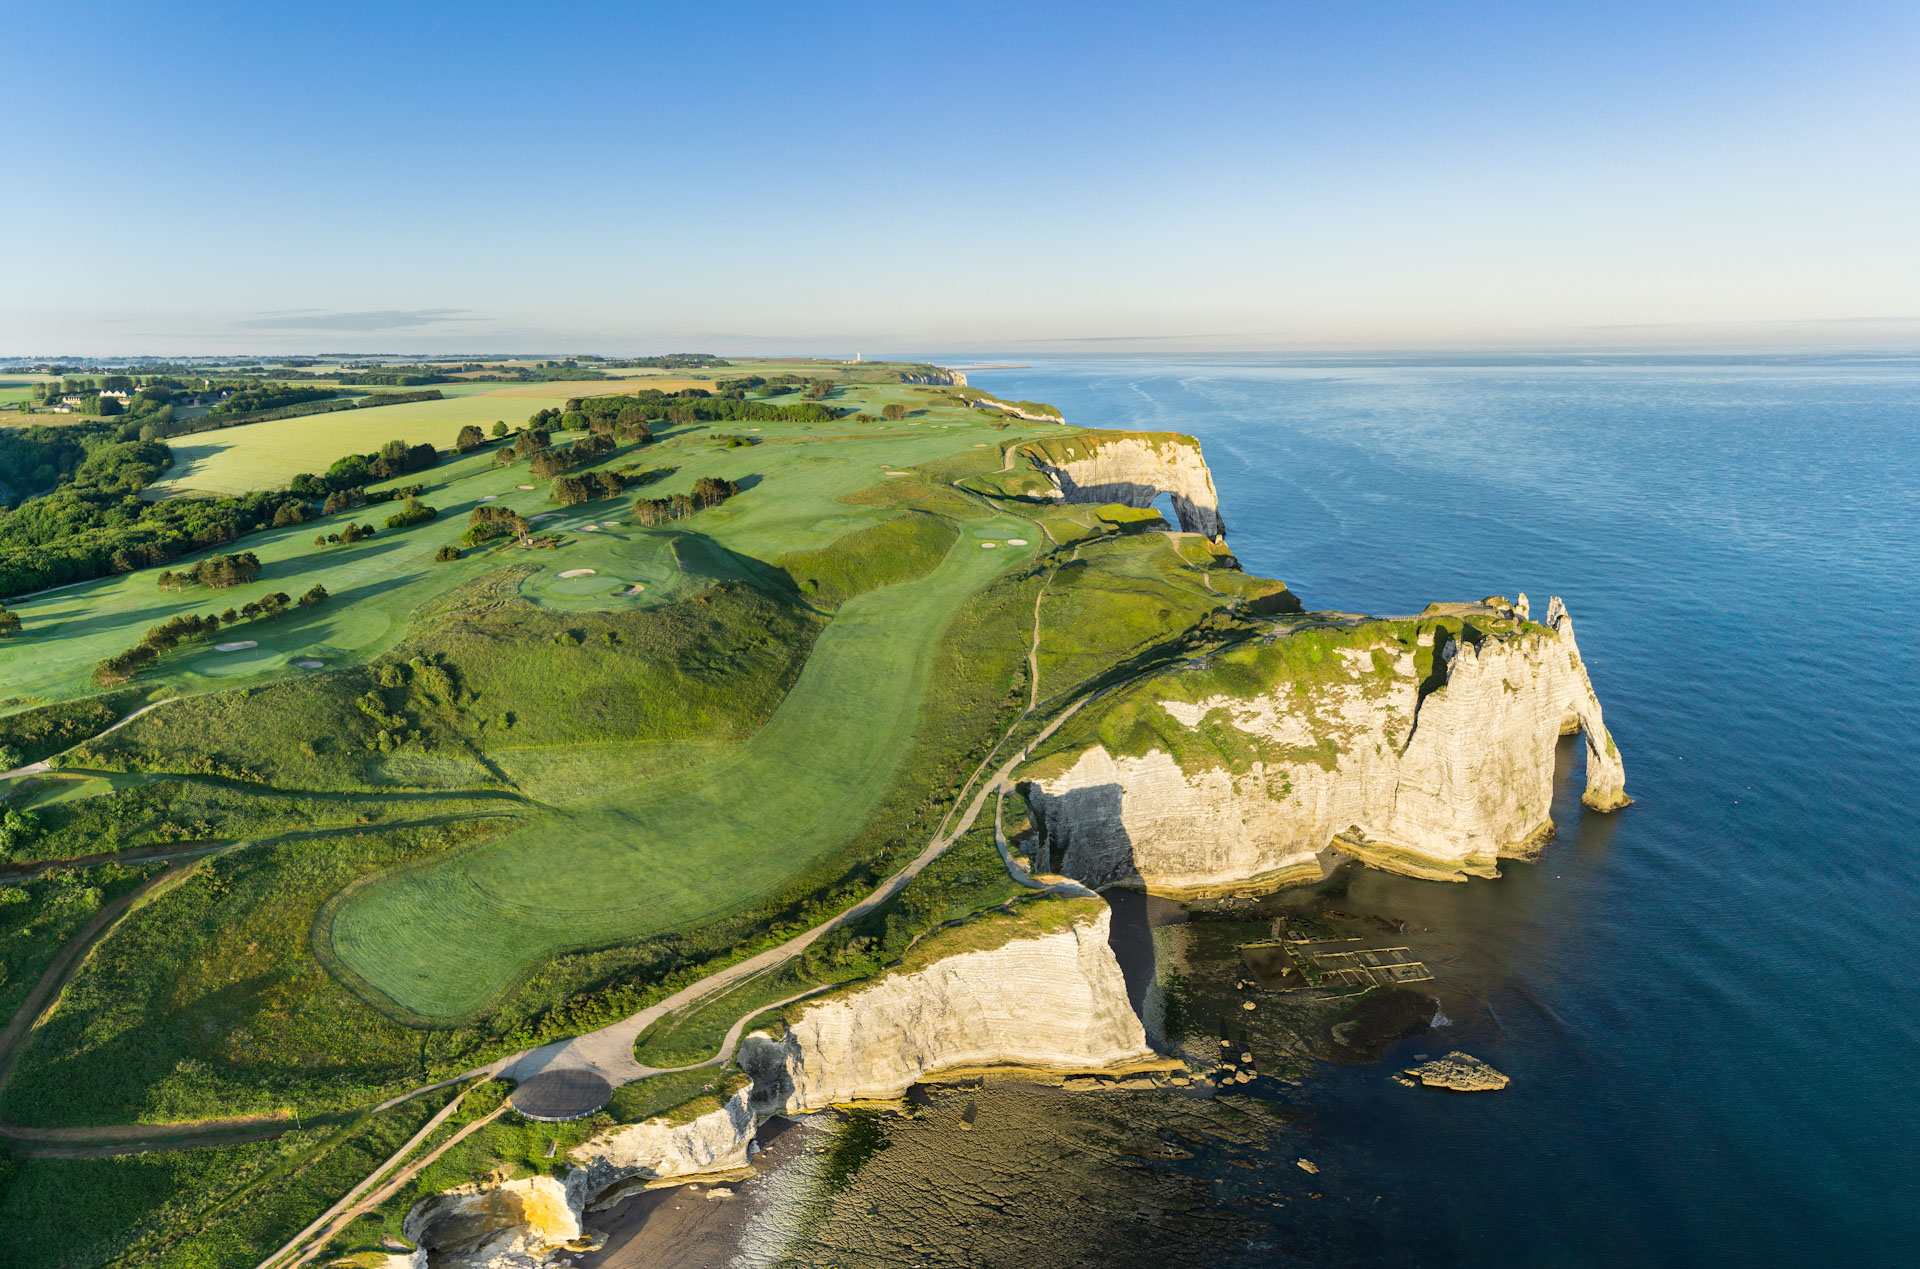 Aerial view of the tenth hole at Etretat Golf Club, Normandy, France